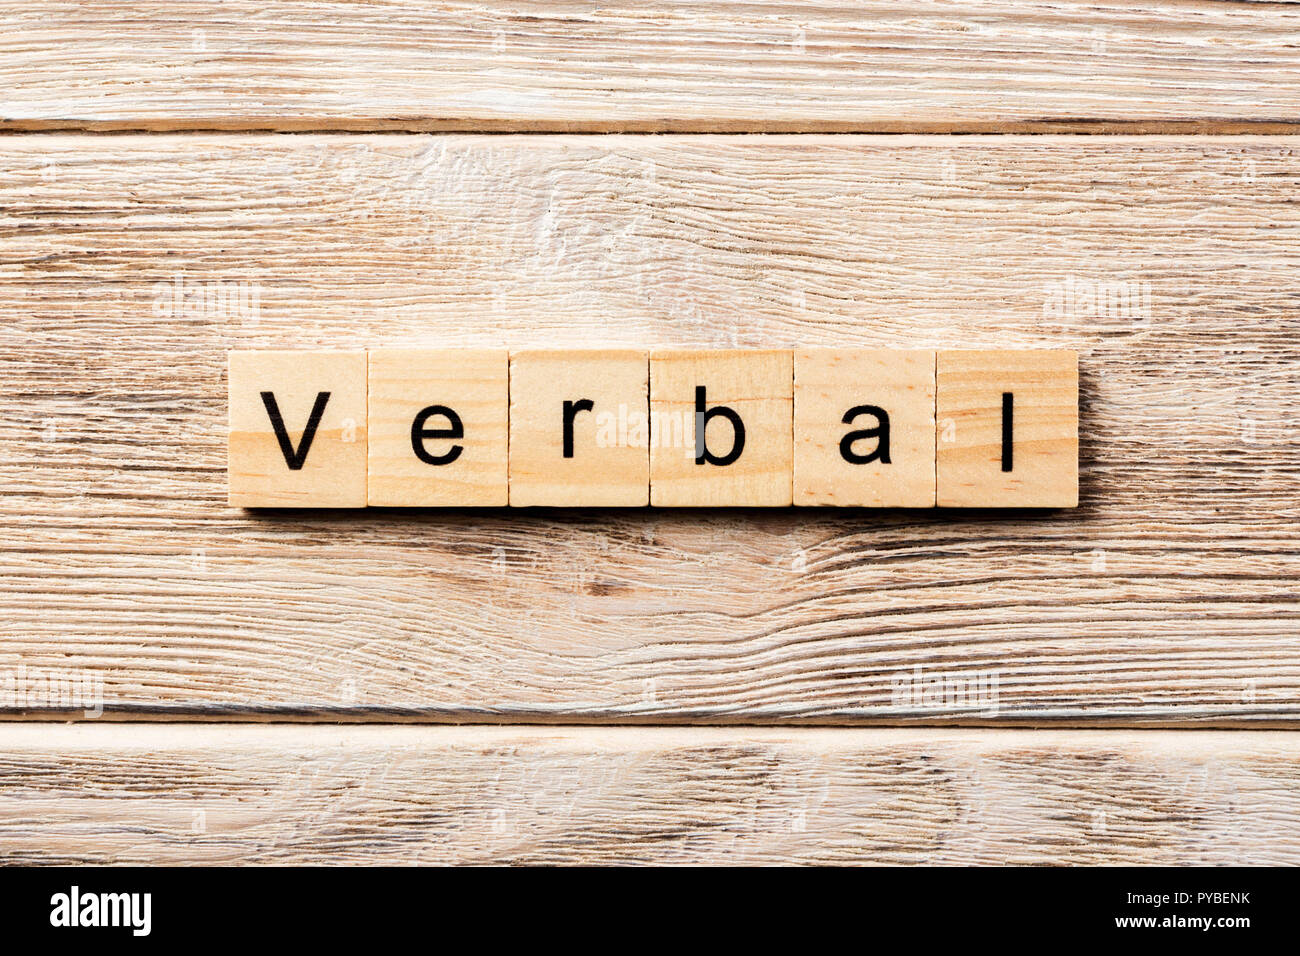 verbal word written on wood block. verbal text on table, concept. Stock Photo